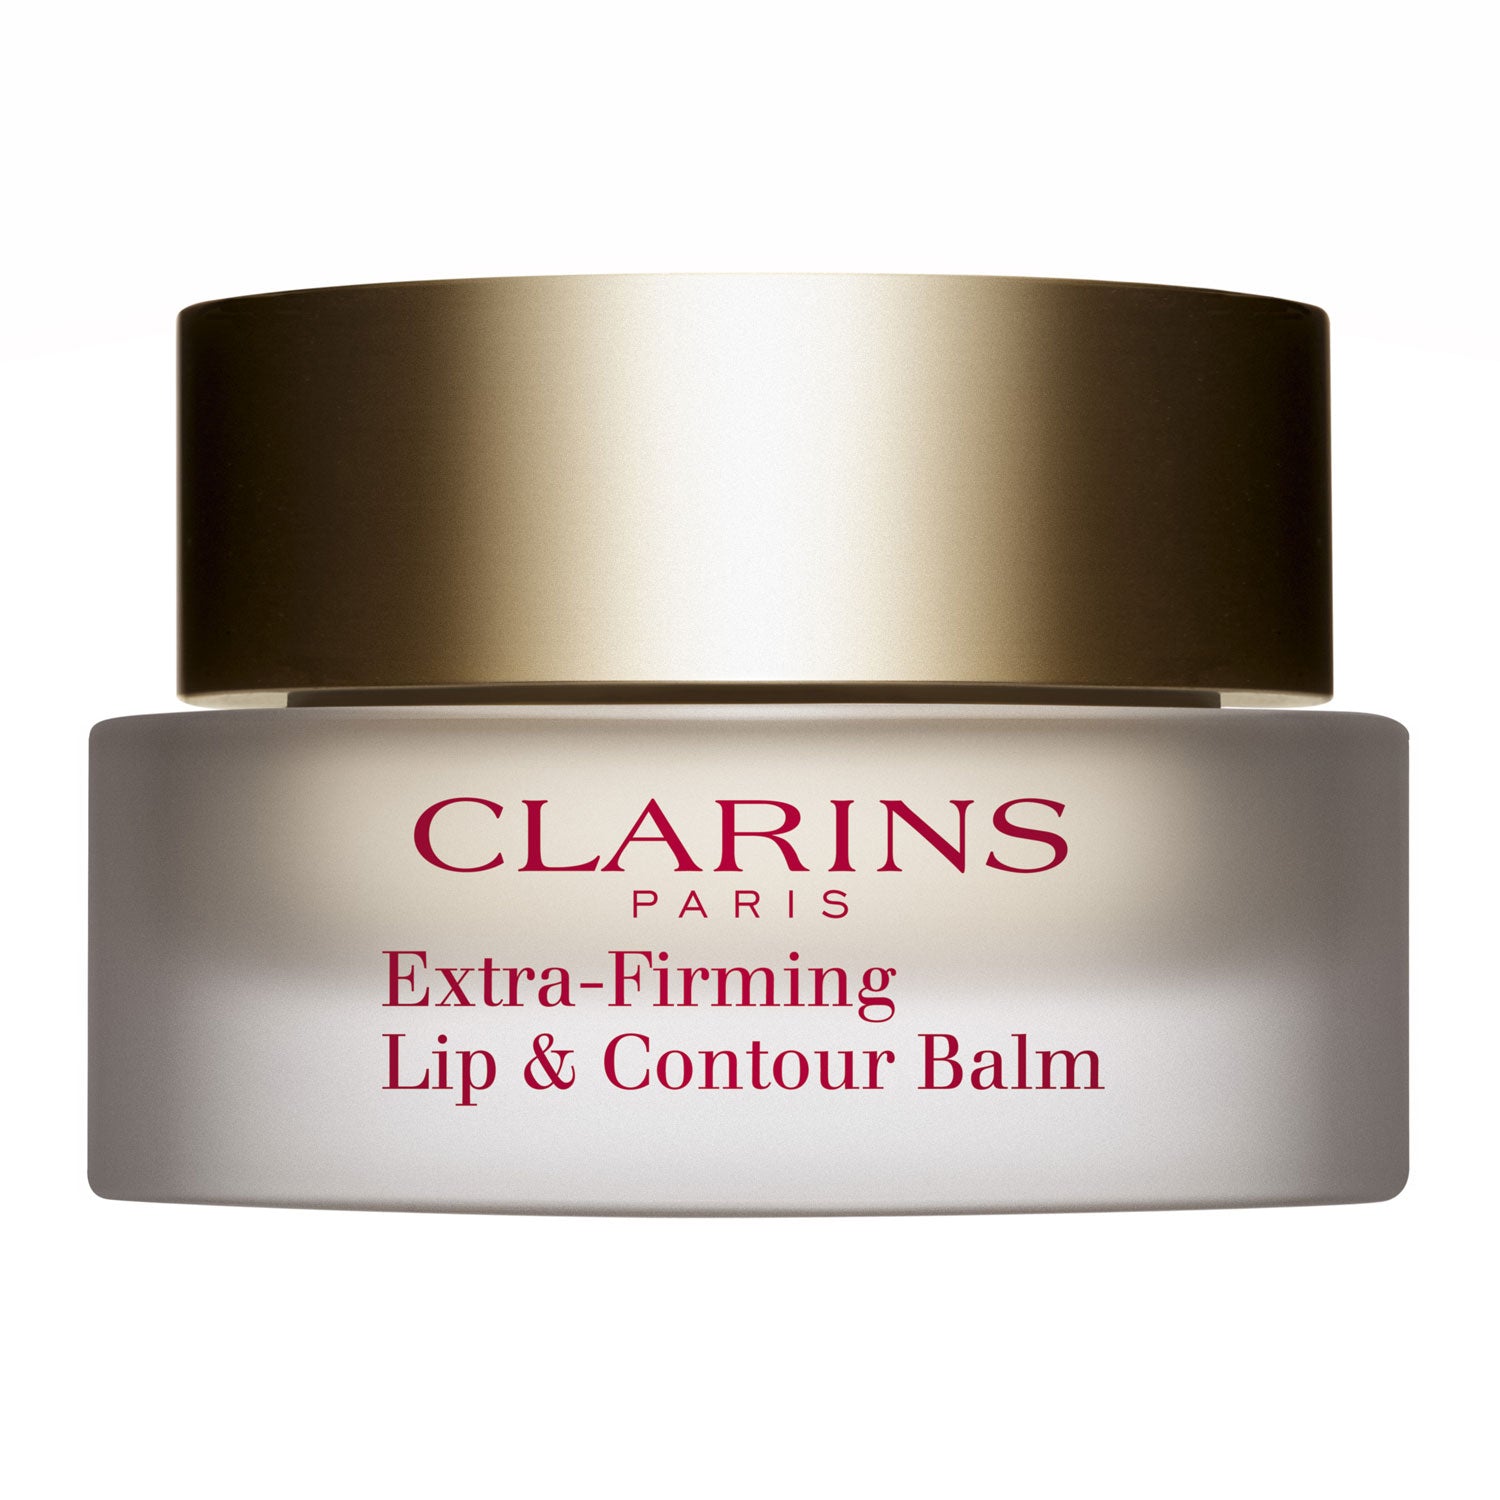 Clarins Clarins Extra Firming Lip and Contour Balm 20ml 1 Shaws Department Stores